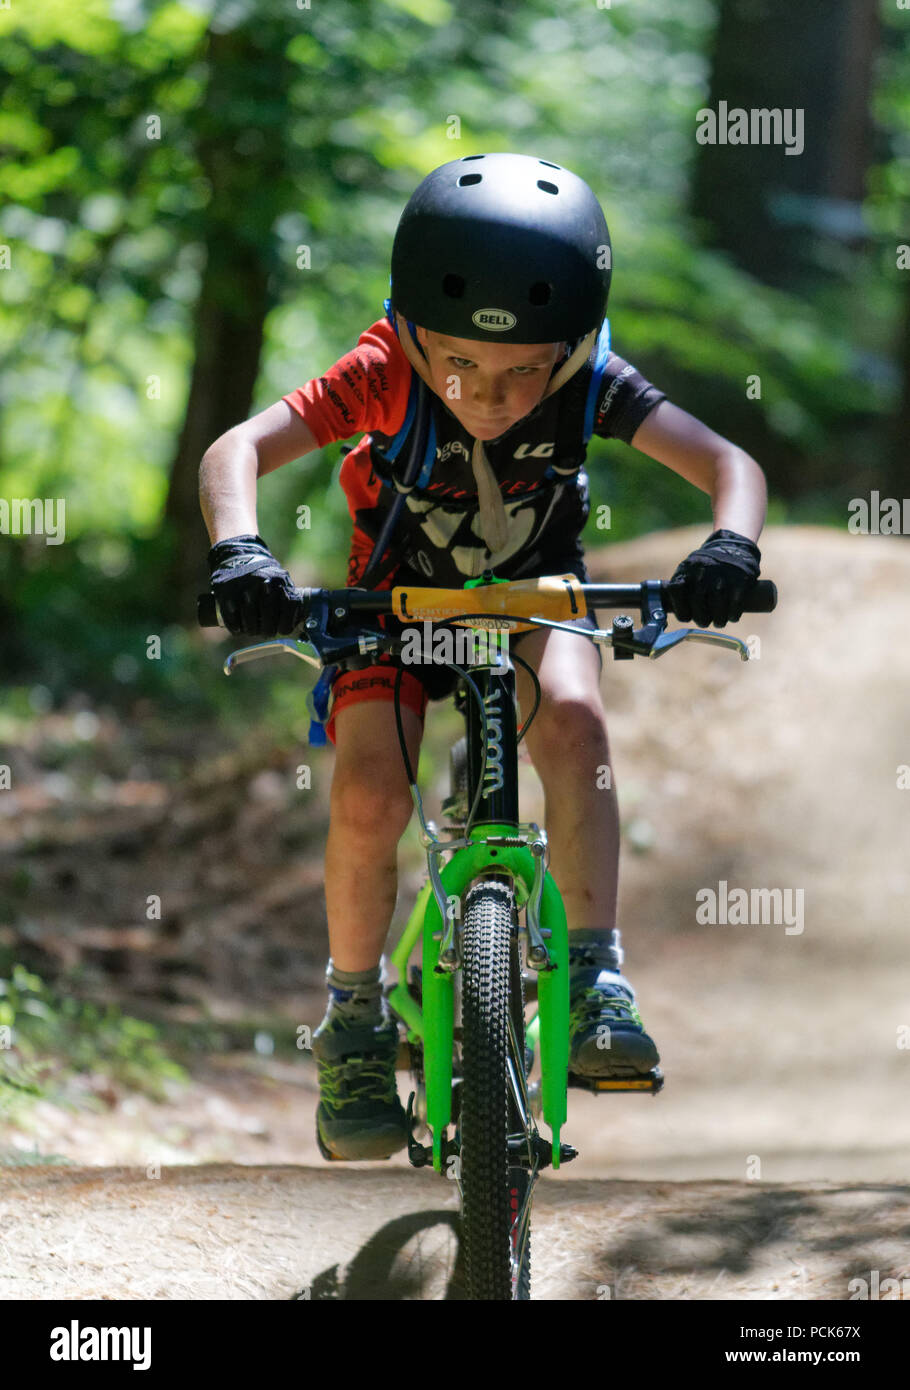 A young boy (6 yr old) riding his bike looking straight at the camera, Kingdom Trails, East Burke, Vermont, USA Stock Photo